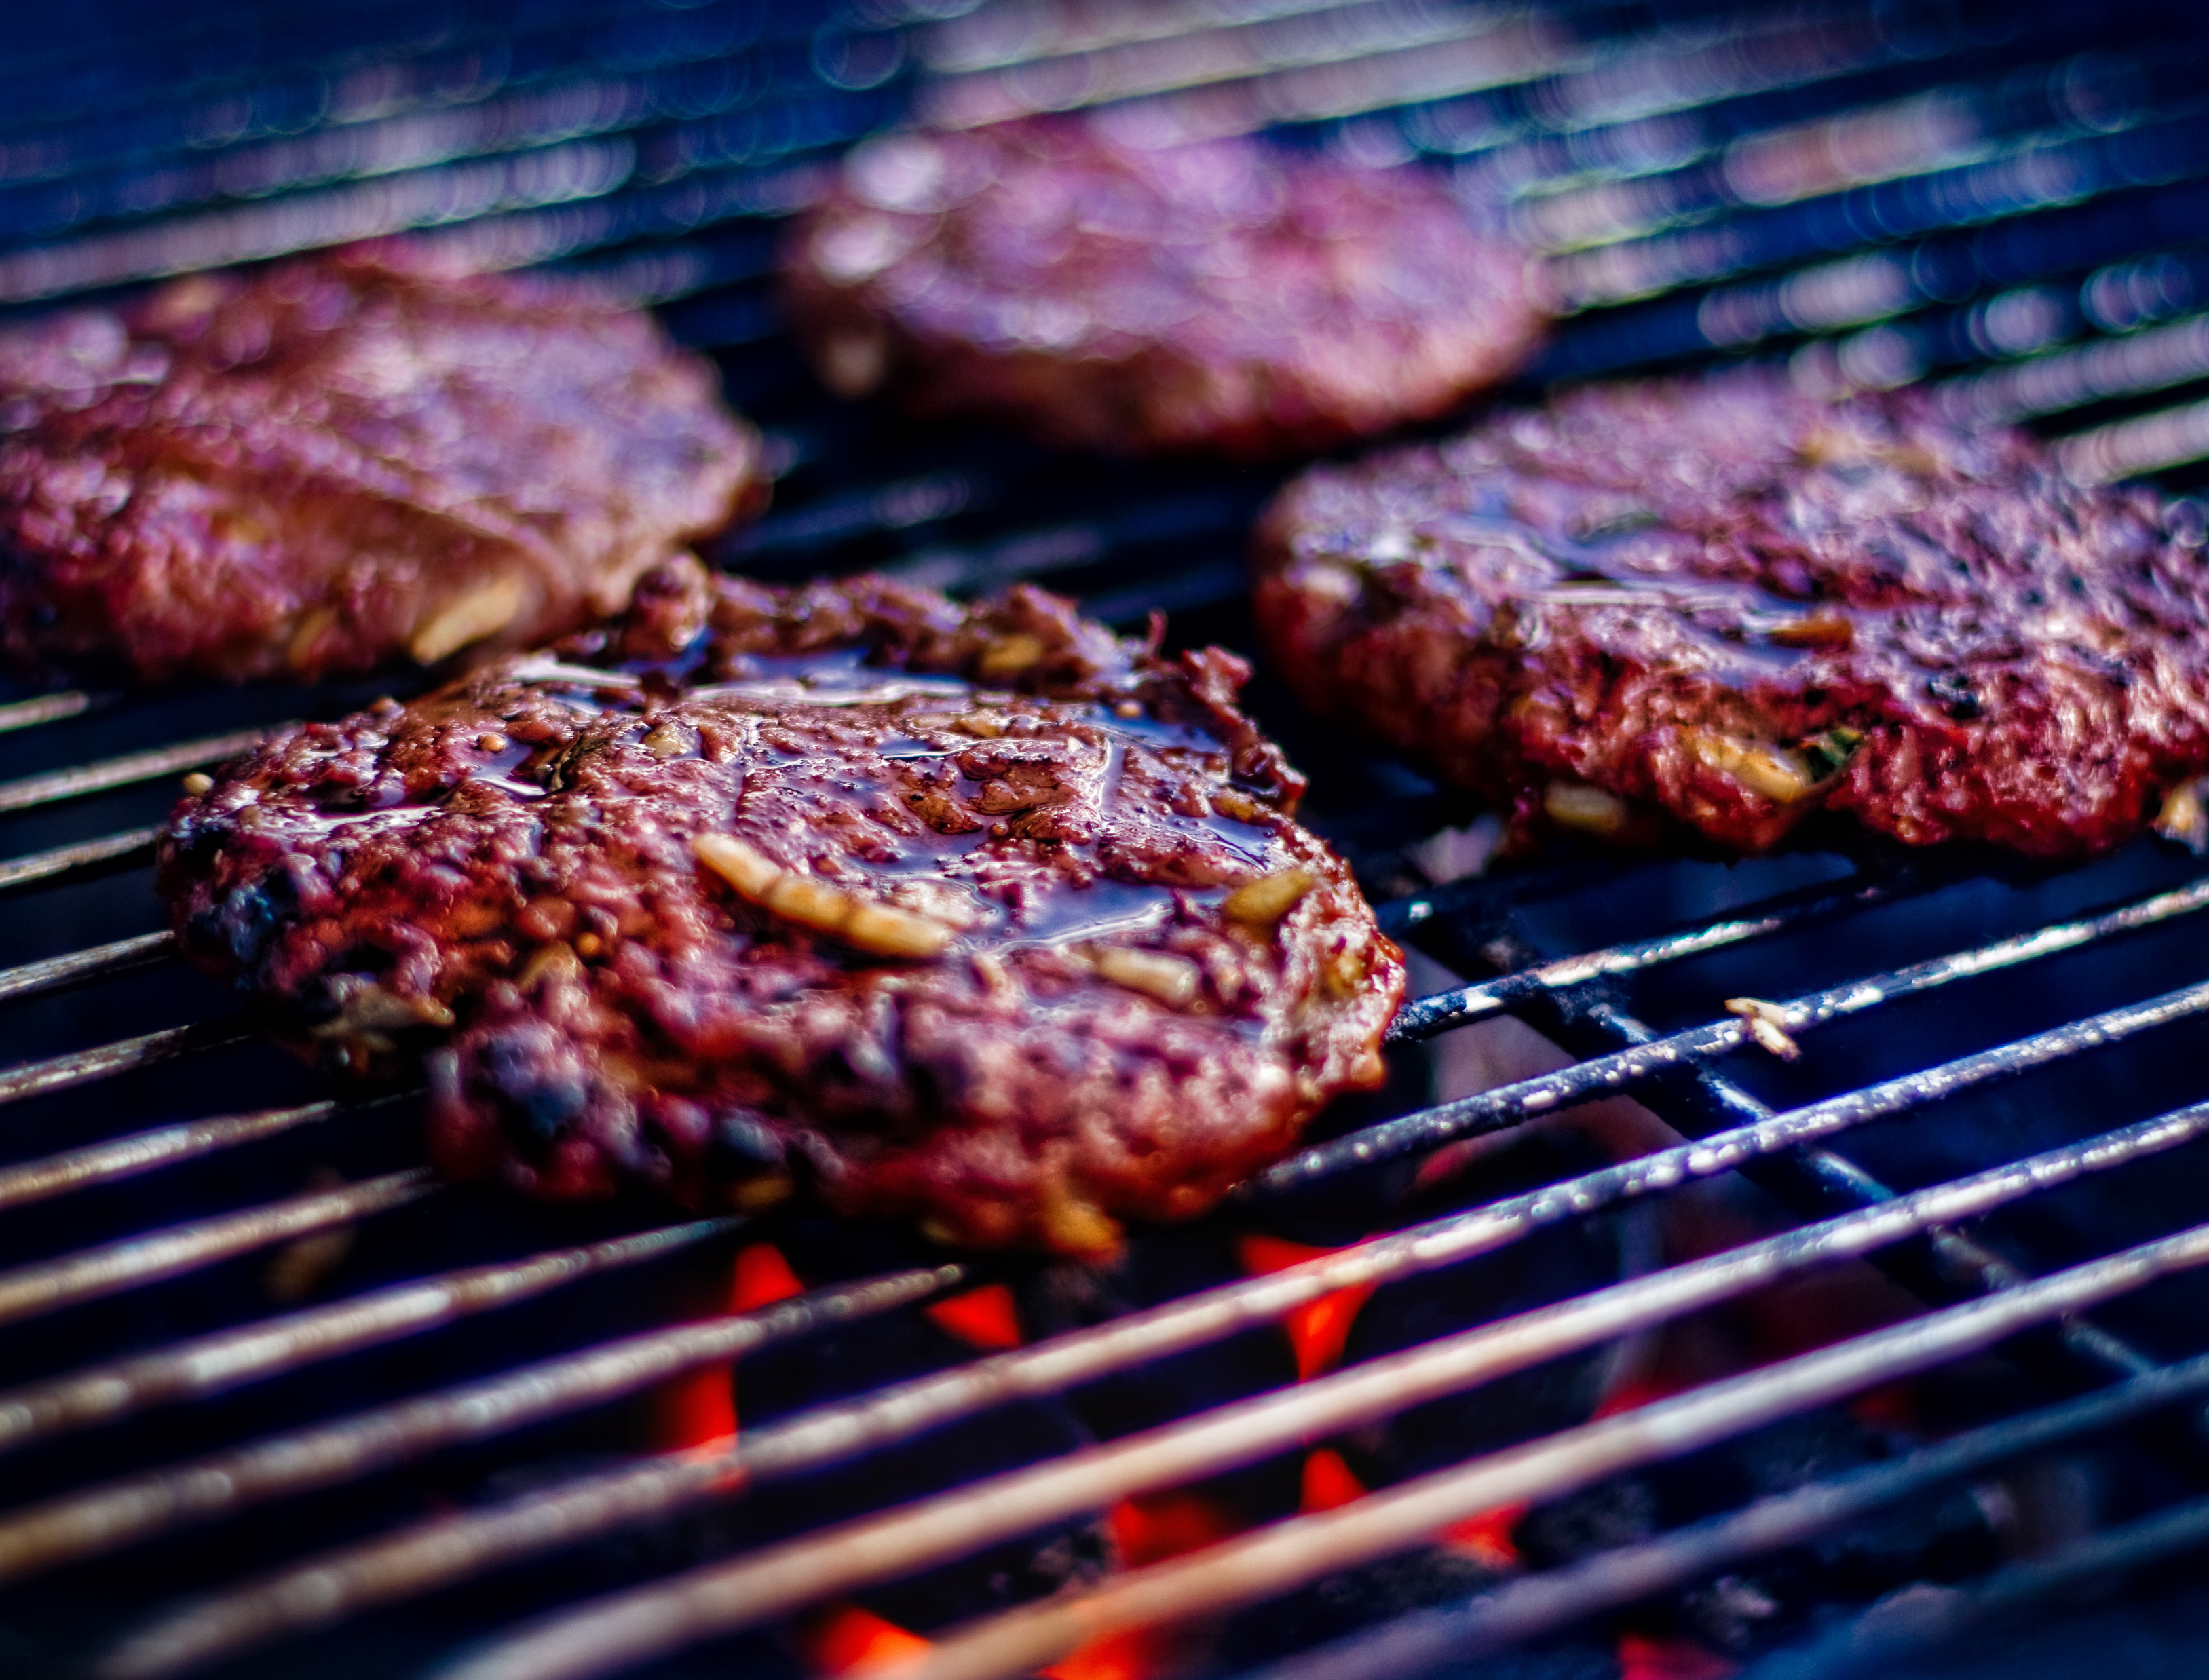 Meat Cooked at High Temperatures Linked to Cancer Risk, Study Says ...